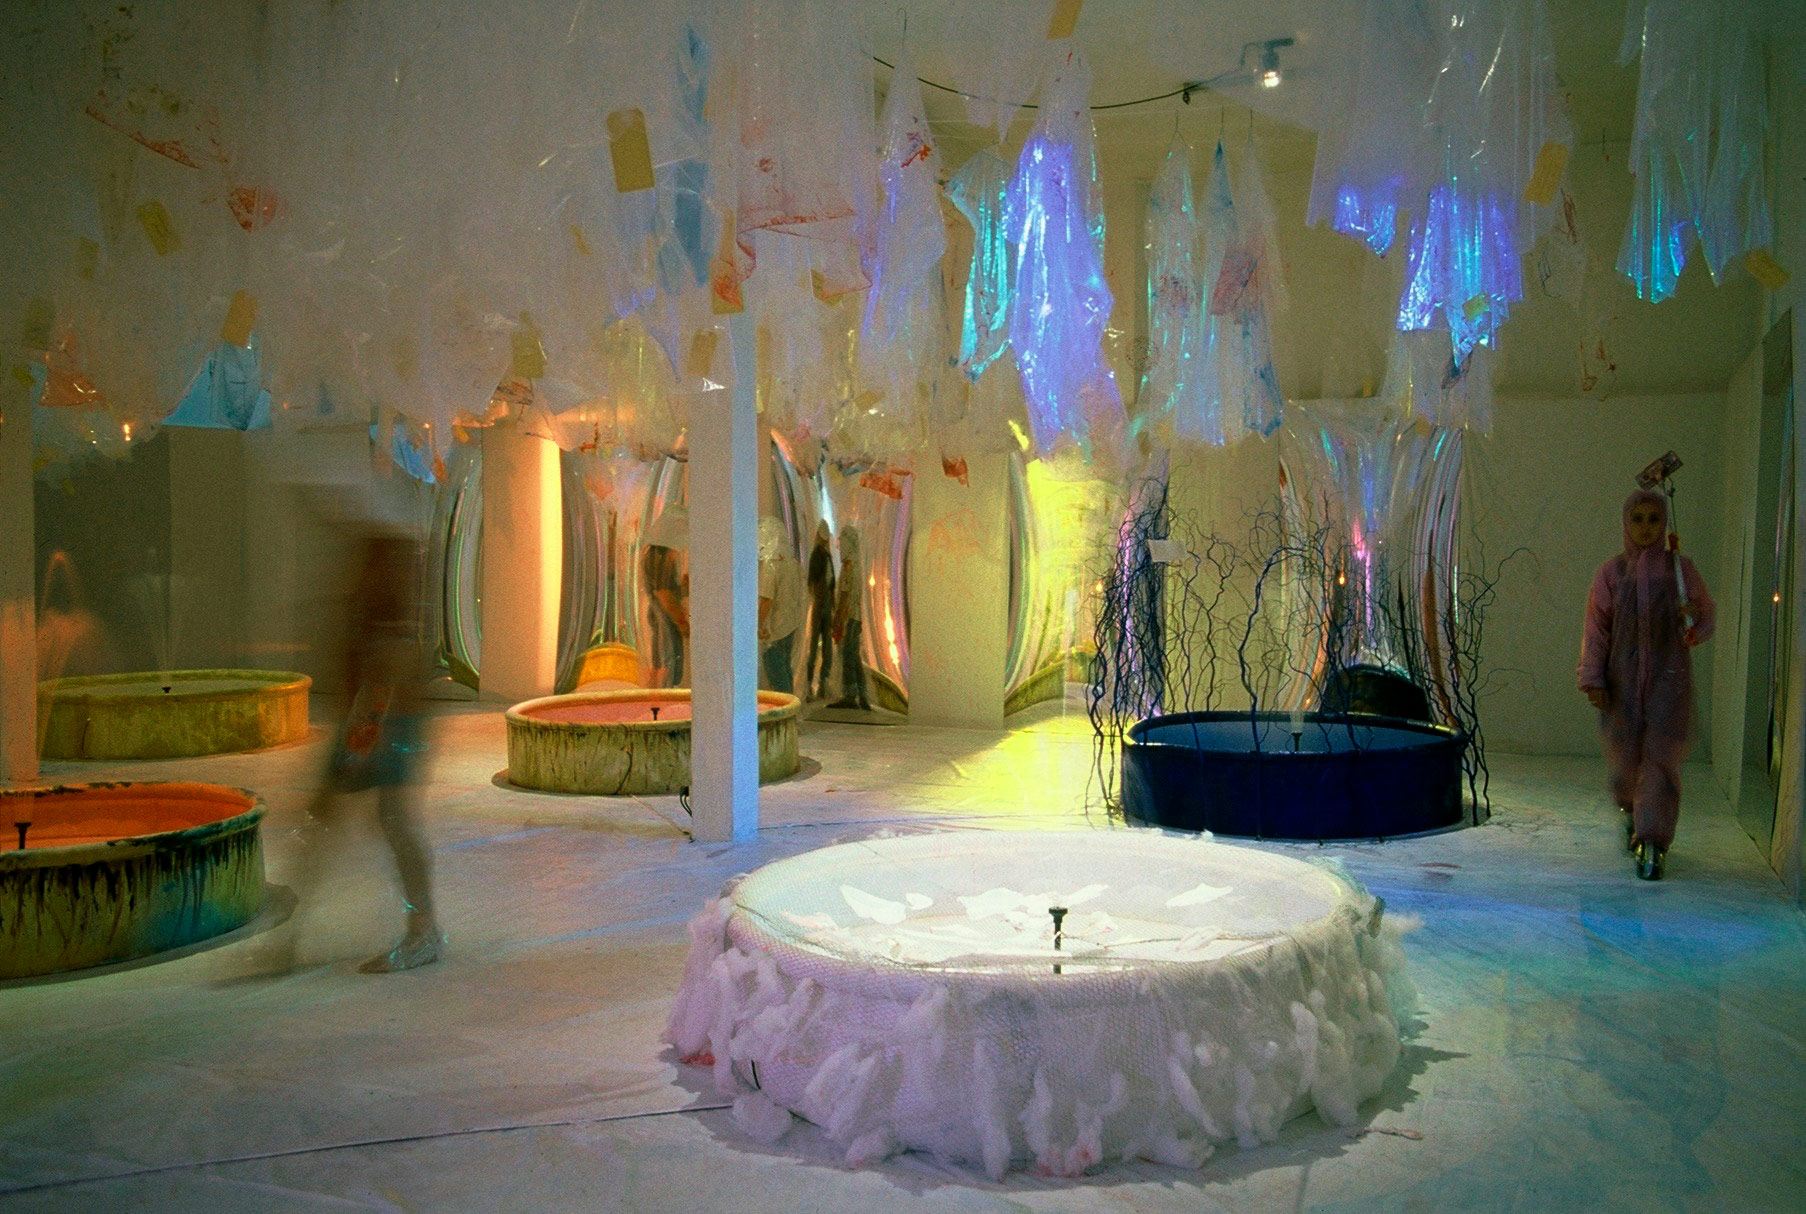  I Had a Thought - Installation Exhibit, Artspace Gallery 1996 